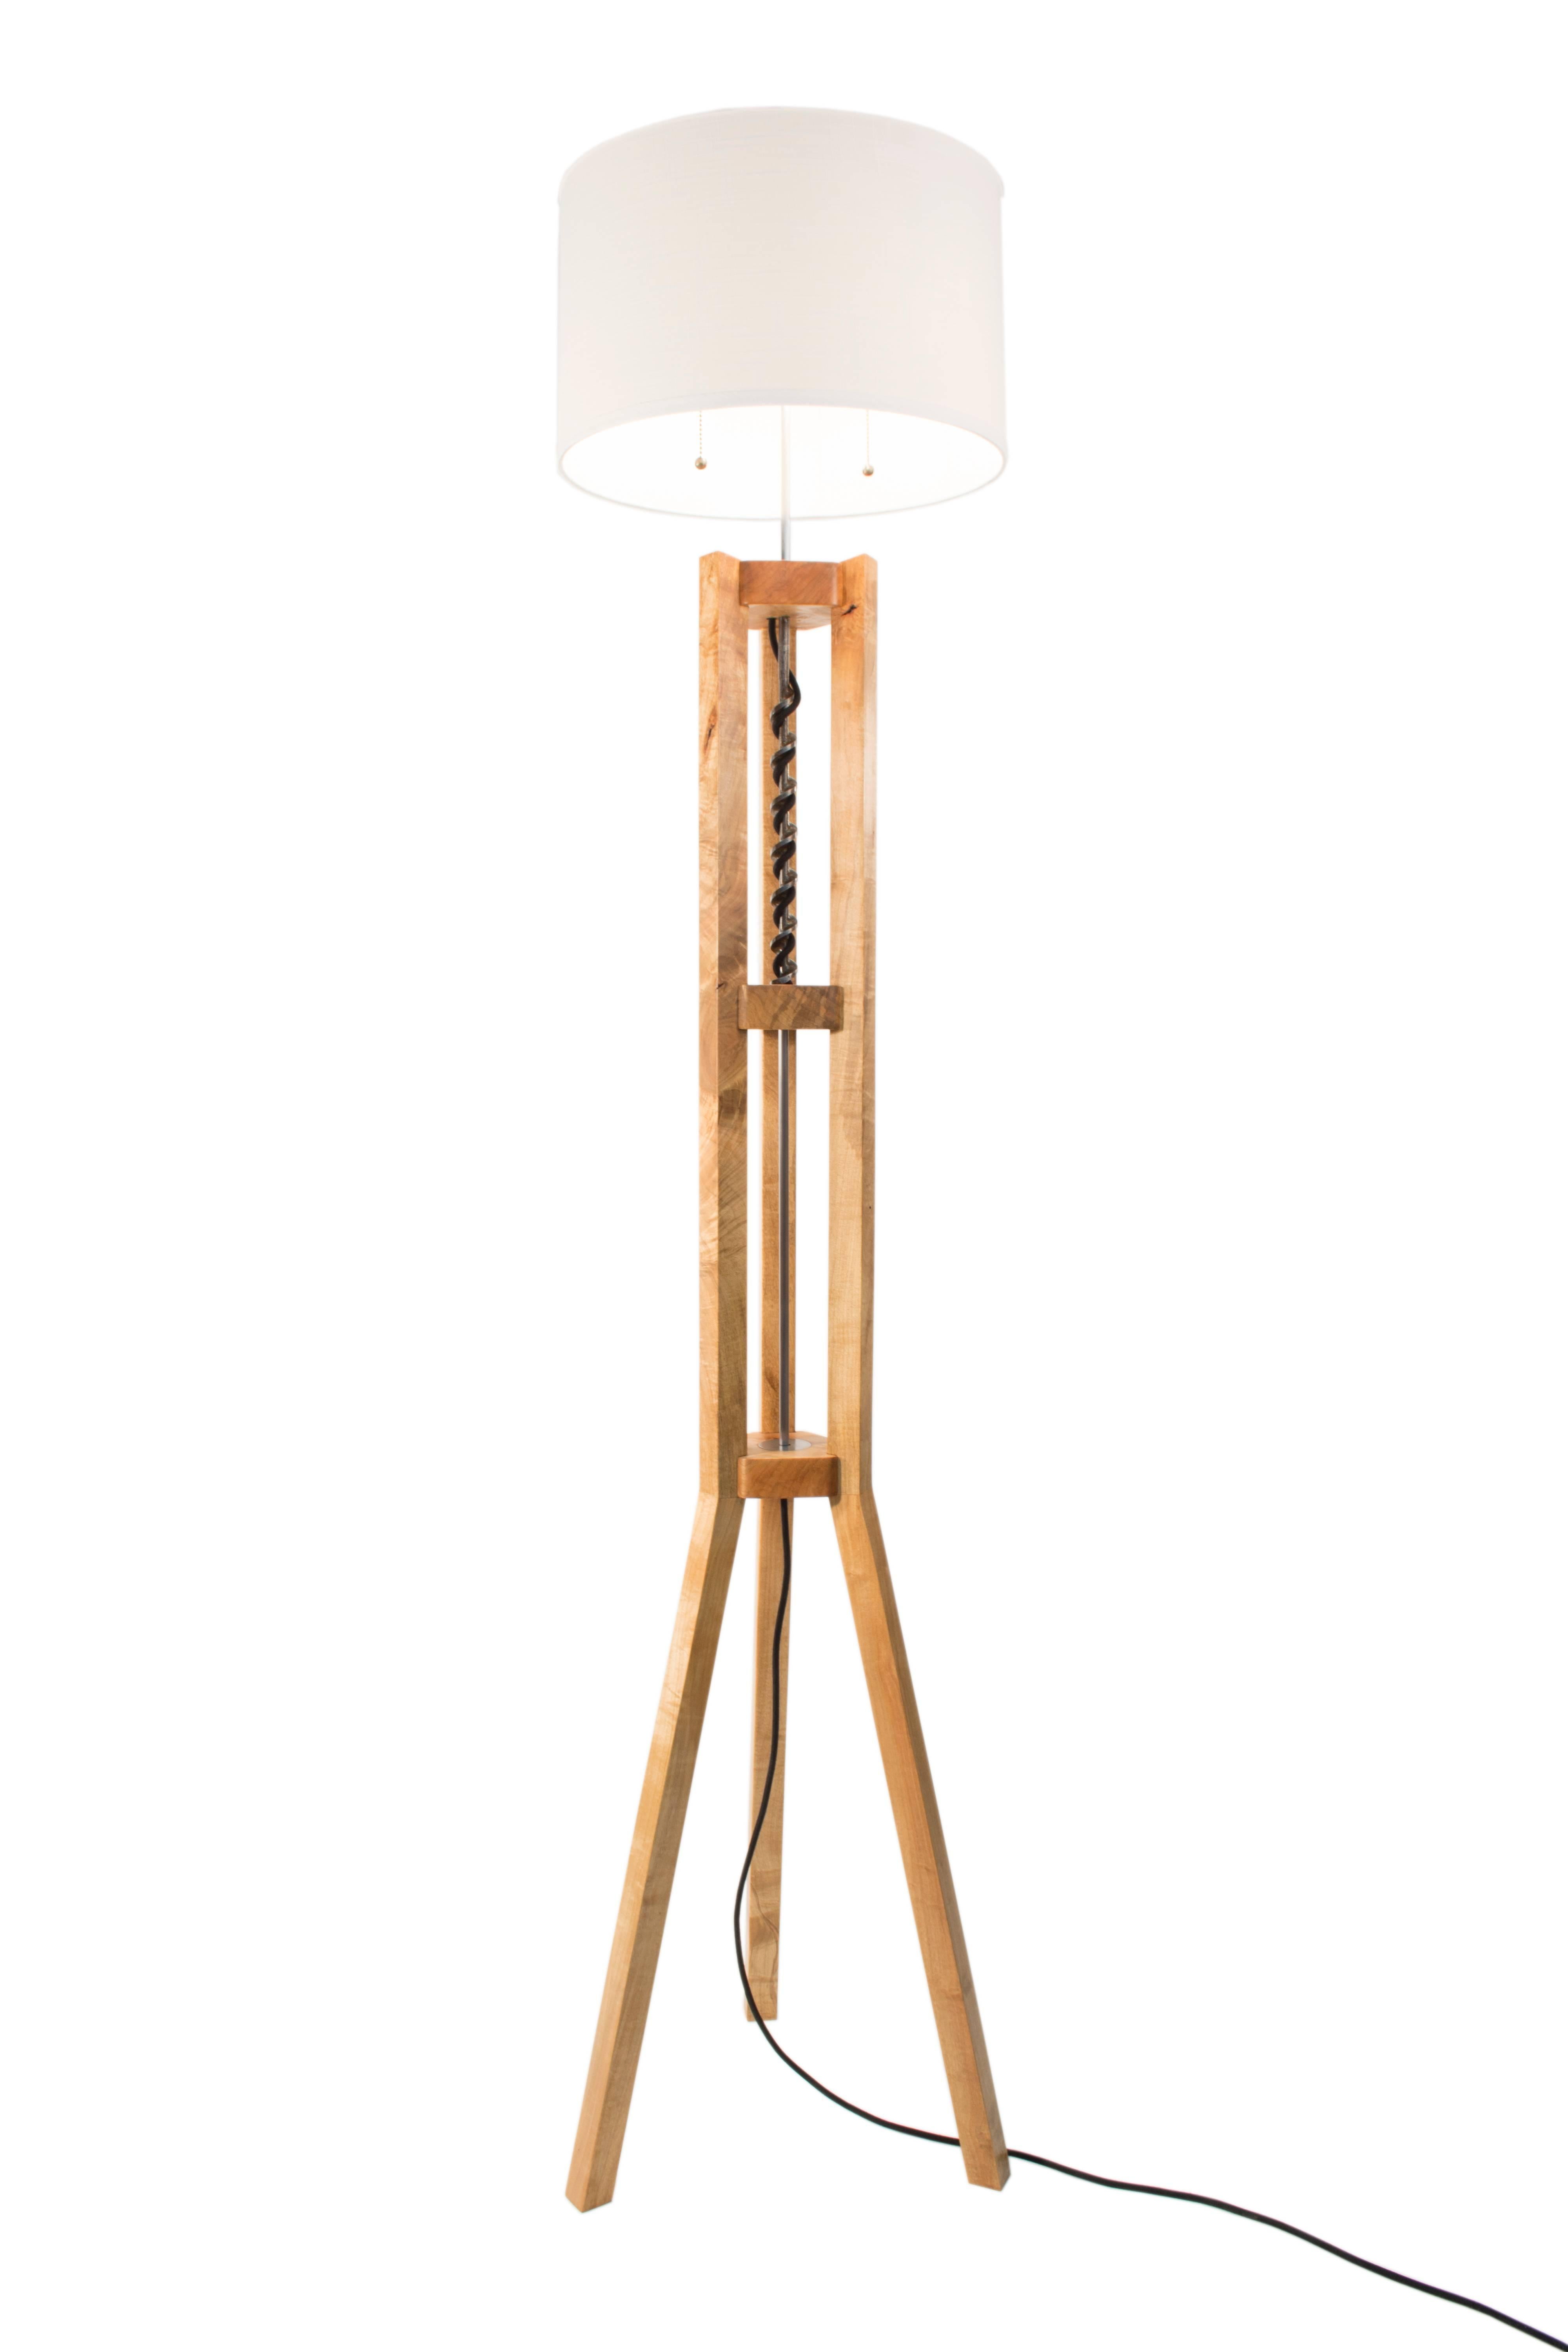 American Bits Floor Lamp : ambrosia maple, antique drill bit, handmade to order For Sale